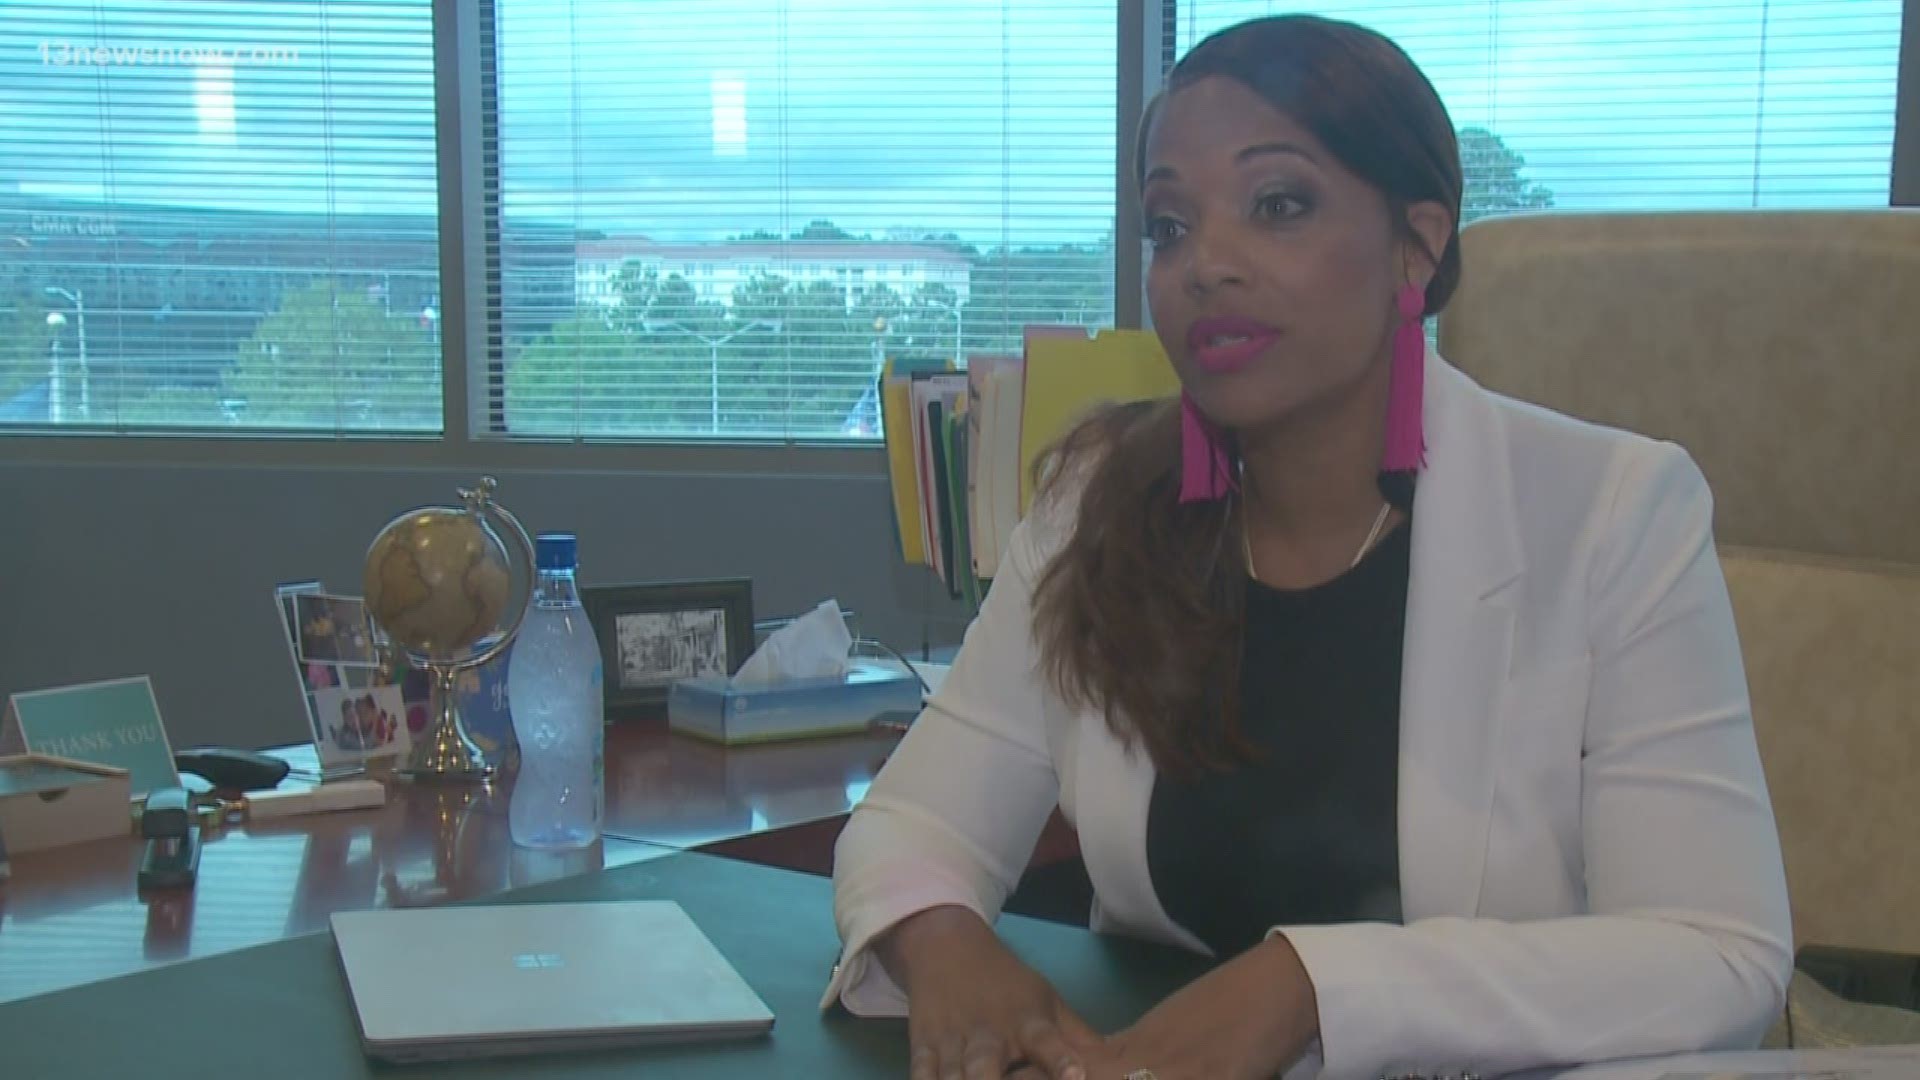 A local entrepreneur inspiring girls and young women across the country to be business leaders.